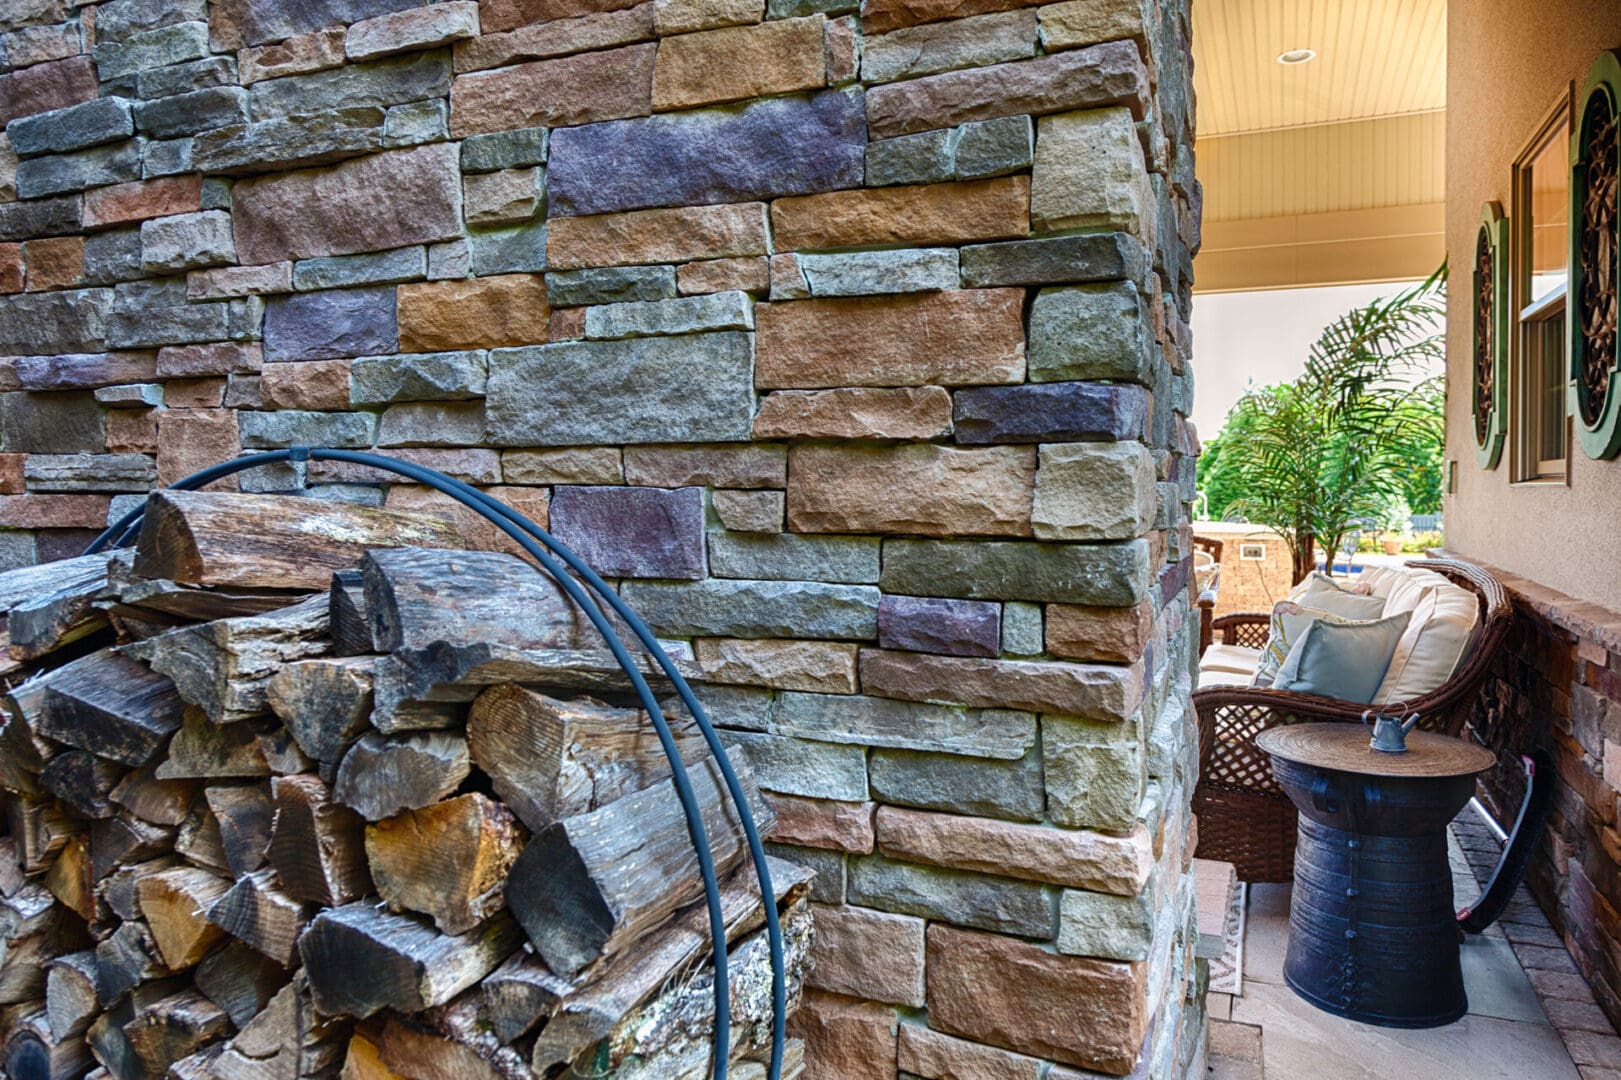 A stone wall showcasing a custom fire pit surrounded by neatly stacked firewood.